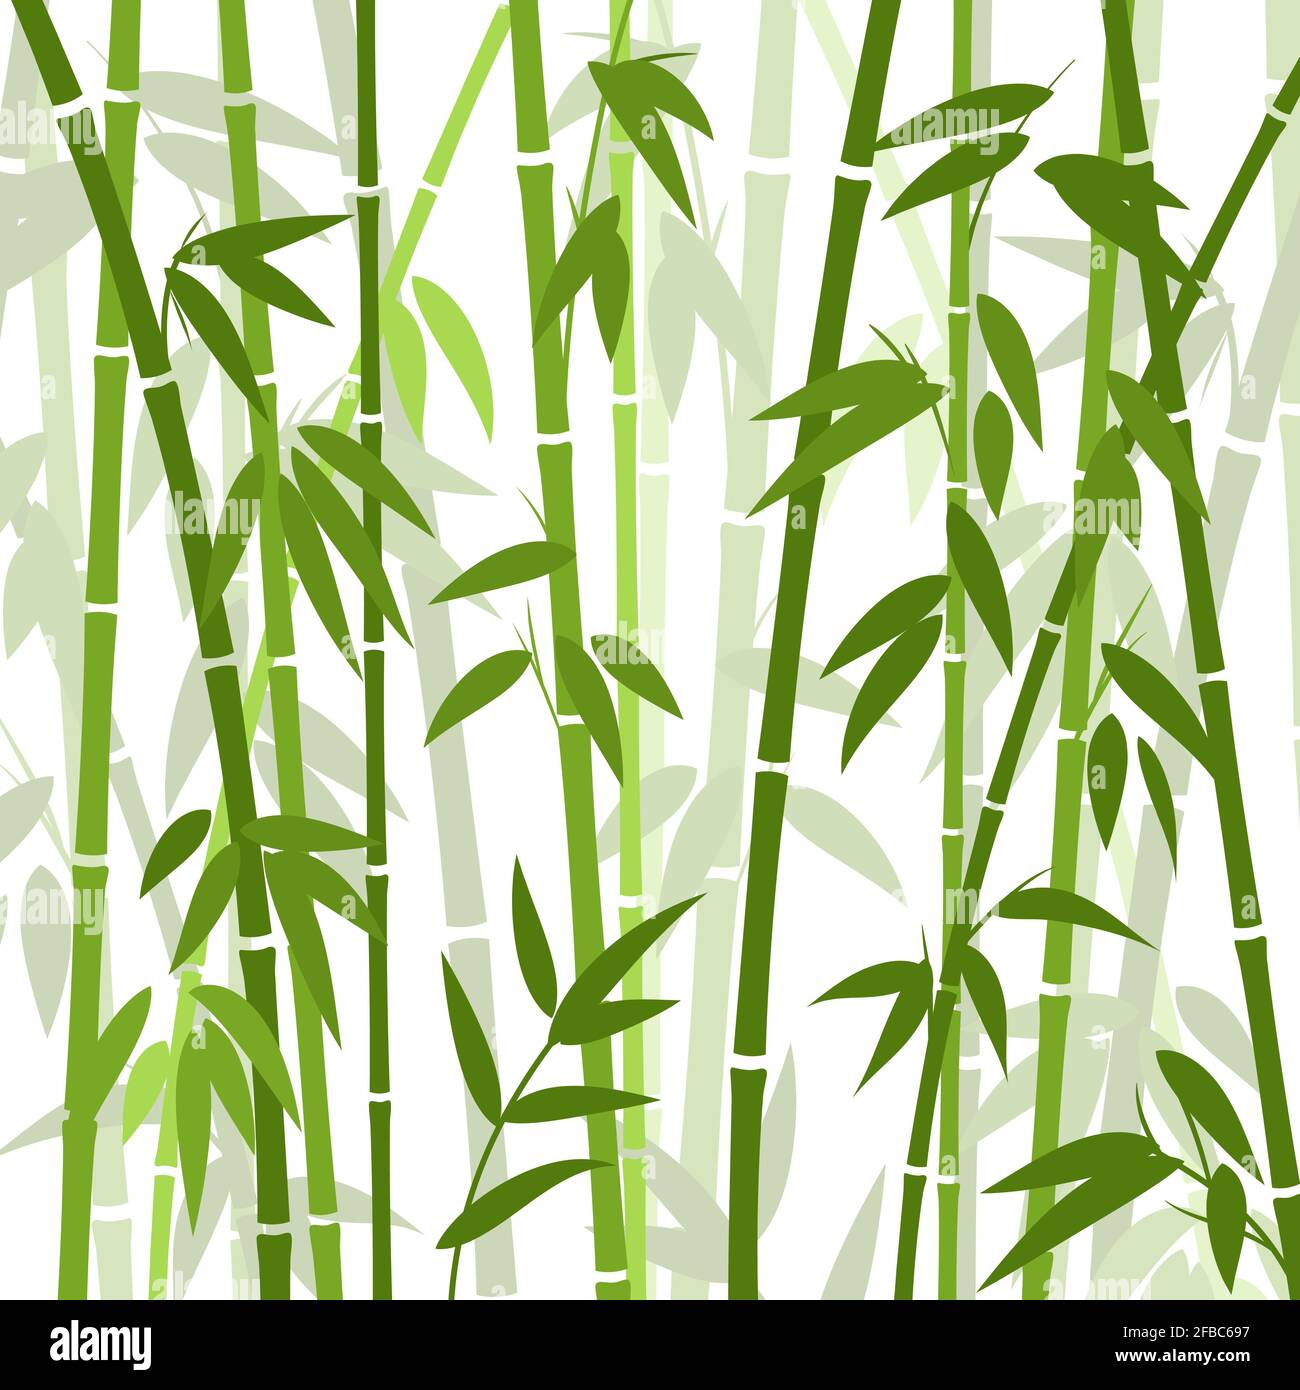 Chinese or japanese bamboo grass oriental wallpaper vector illustration. Tropical asian plant background Stock Vector